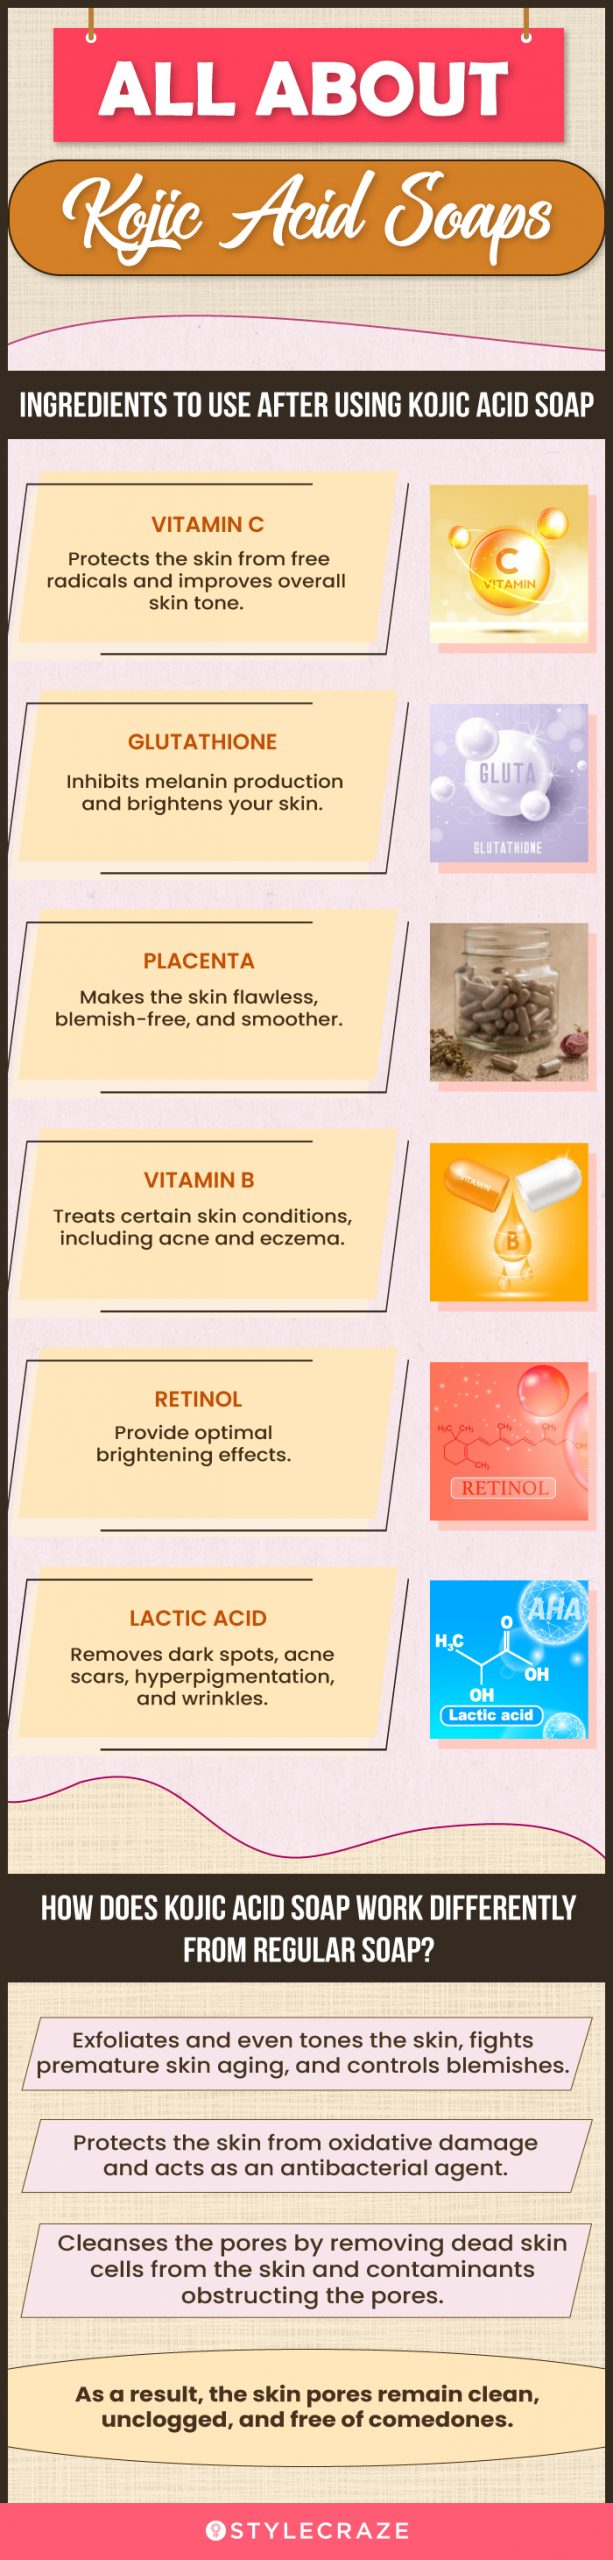 All About Kojic Acid Soaps [infographic]